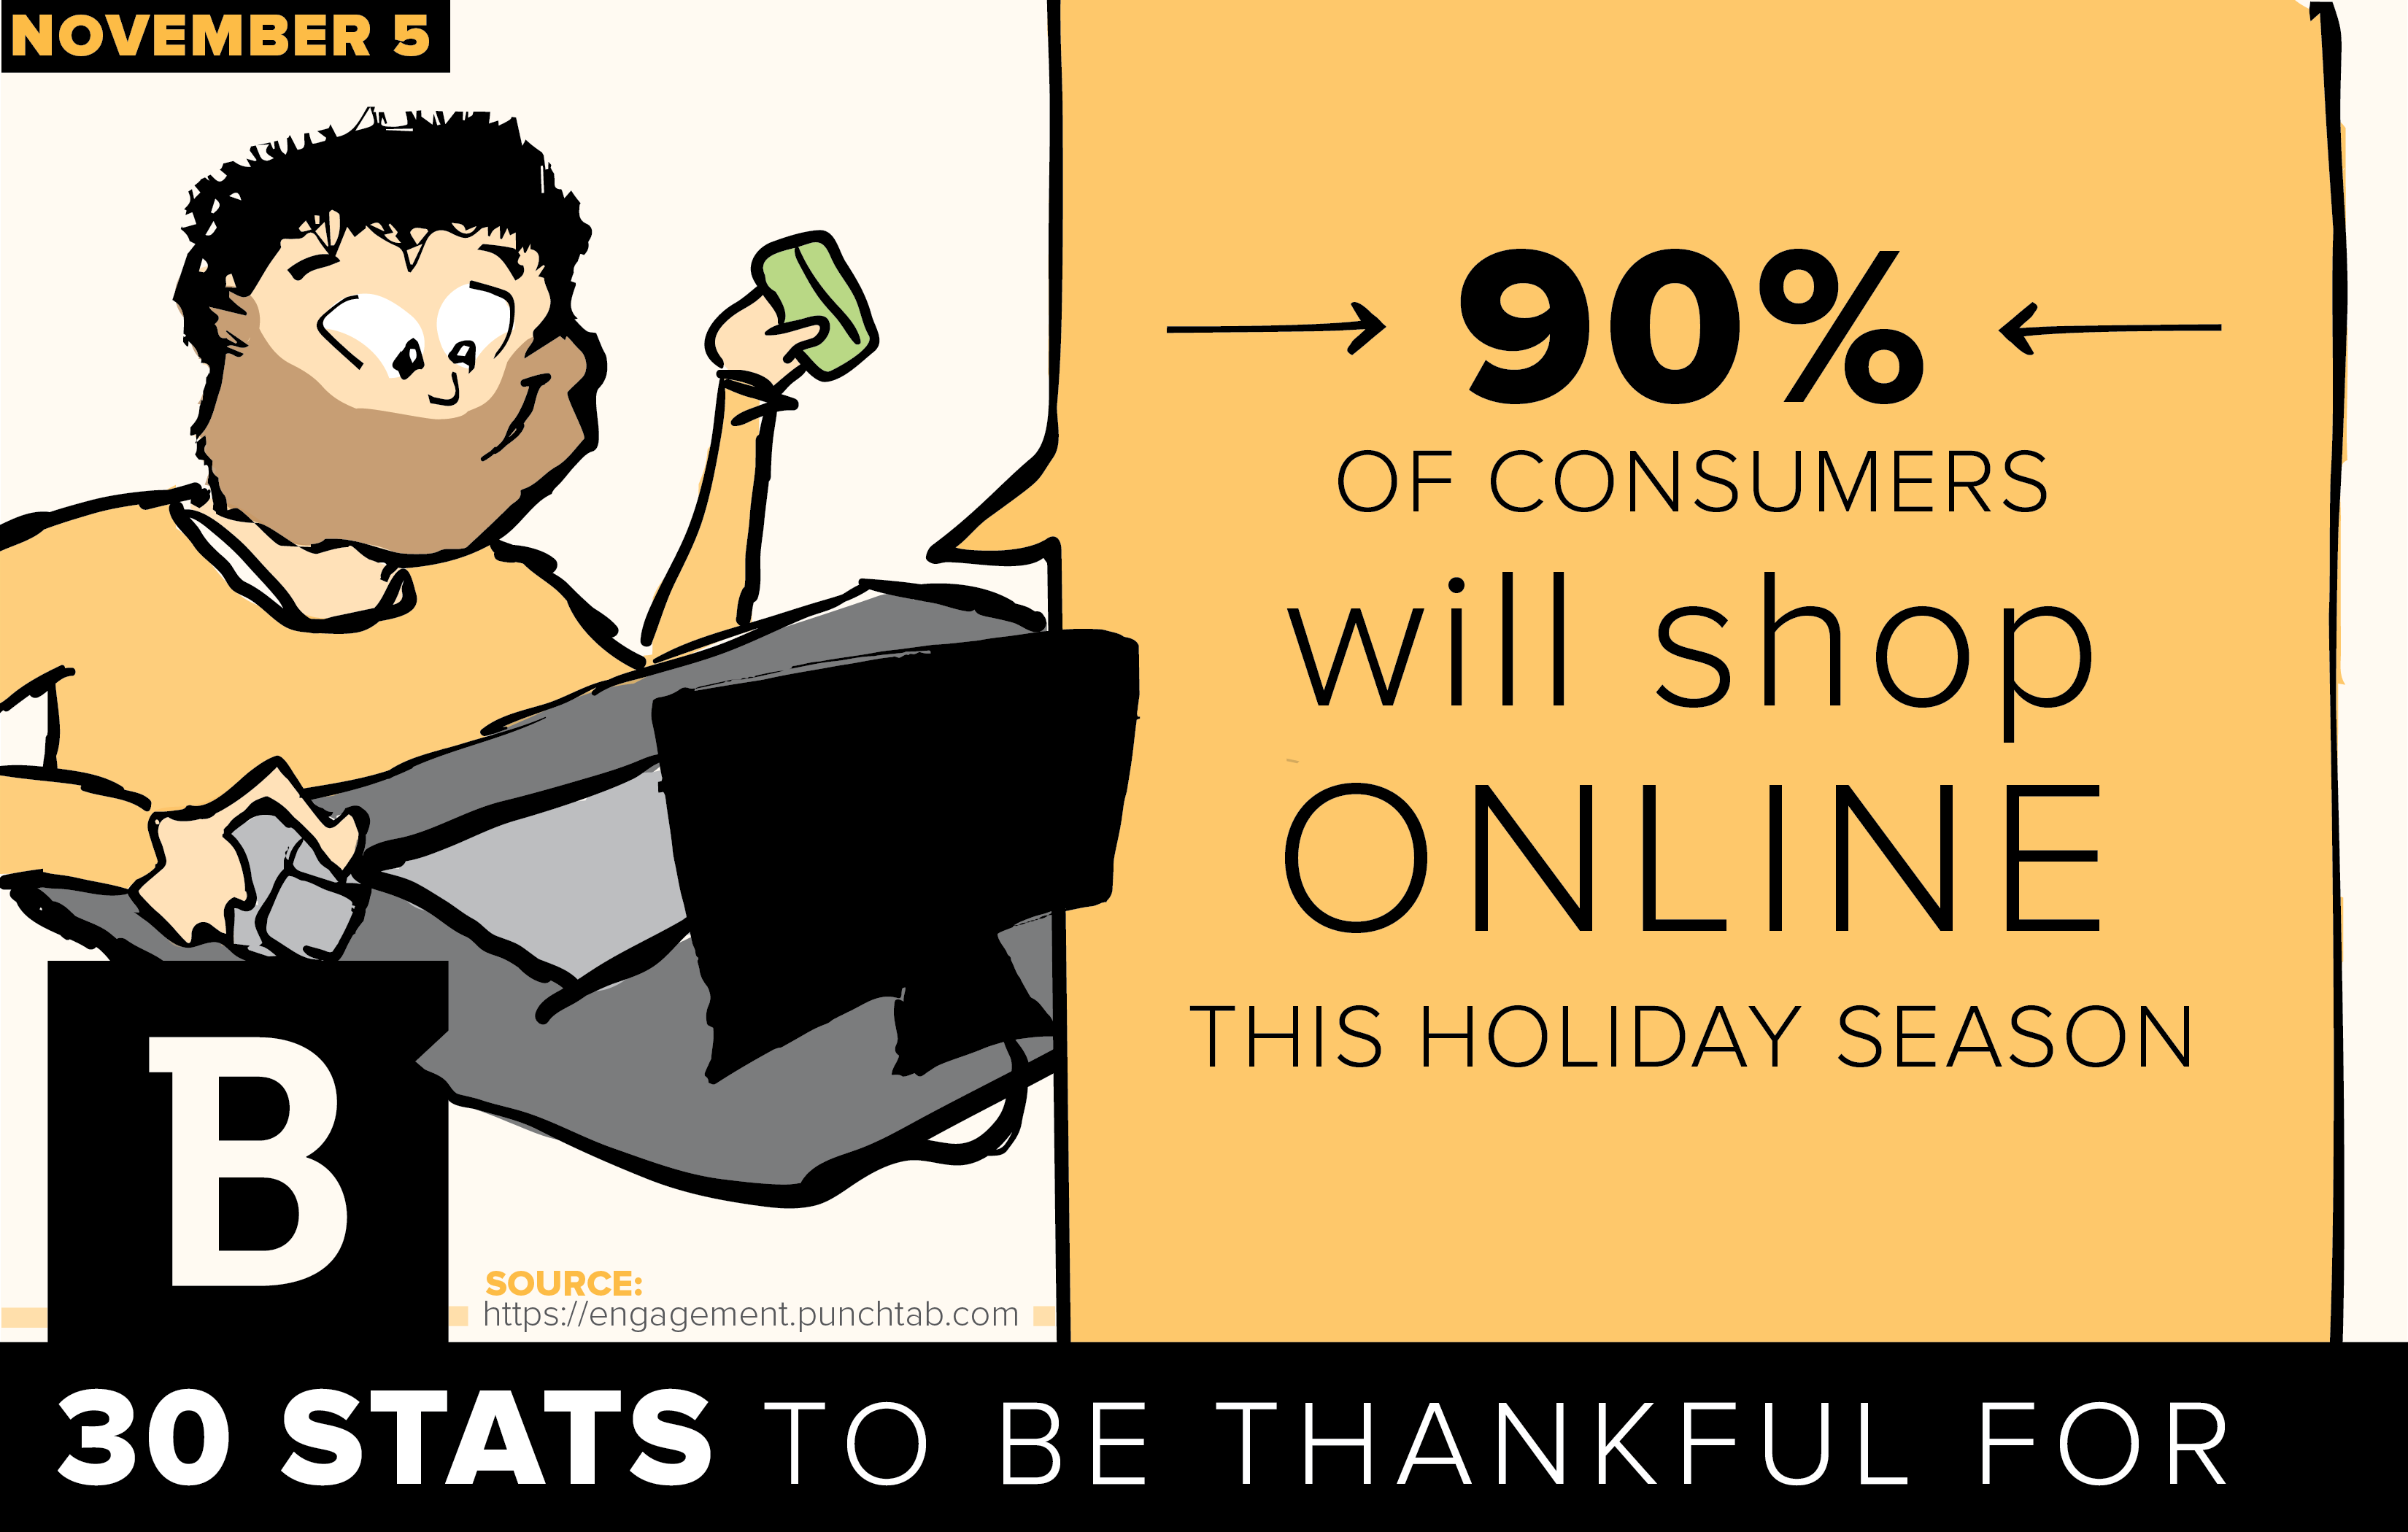 A study finds consumers are spending more over the holiday season.